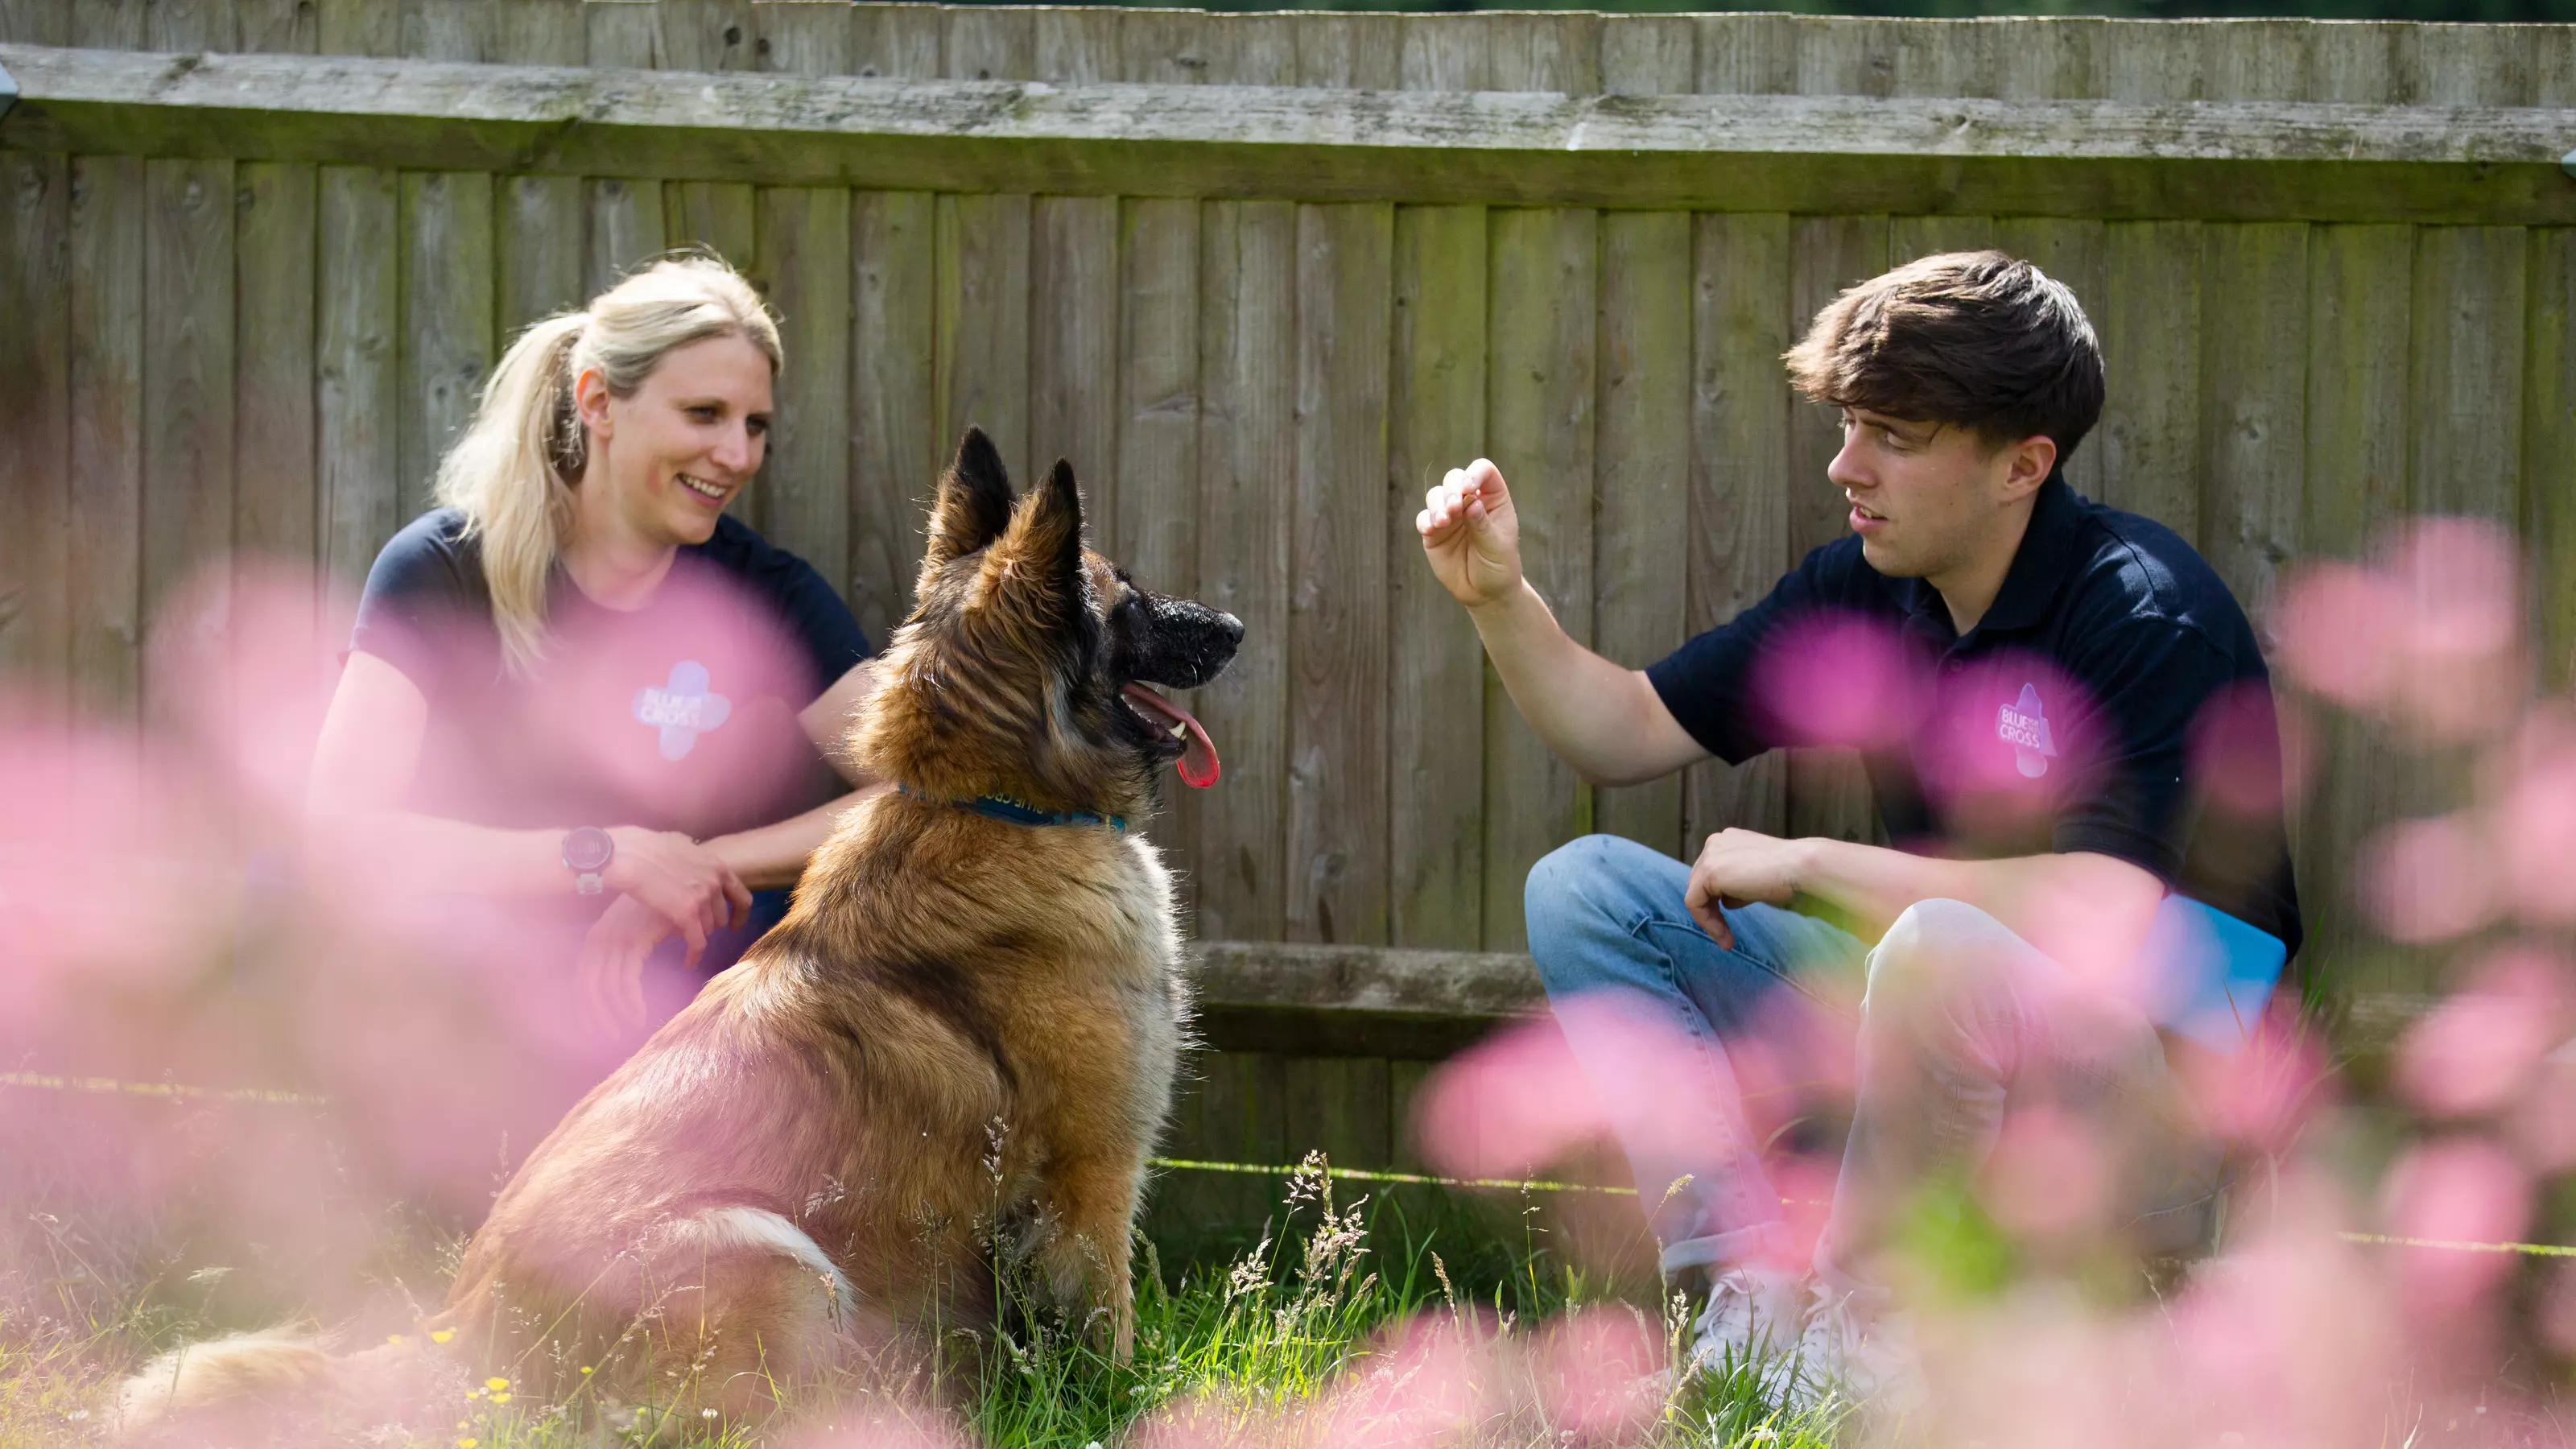 Blue Cross behaviourist Becky Skyrme and Blue Cross trainer Thomas Rainbow look towards a German shepherd dog who sits in between the pair. Thomas has his hand, containing a treat, raised as the dog sits and looks at Thomas.